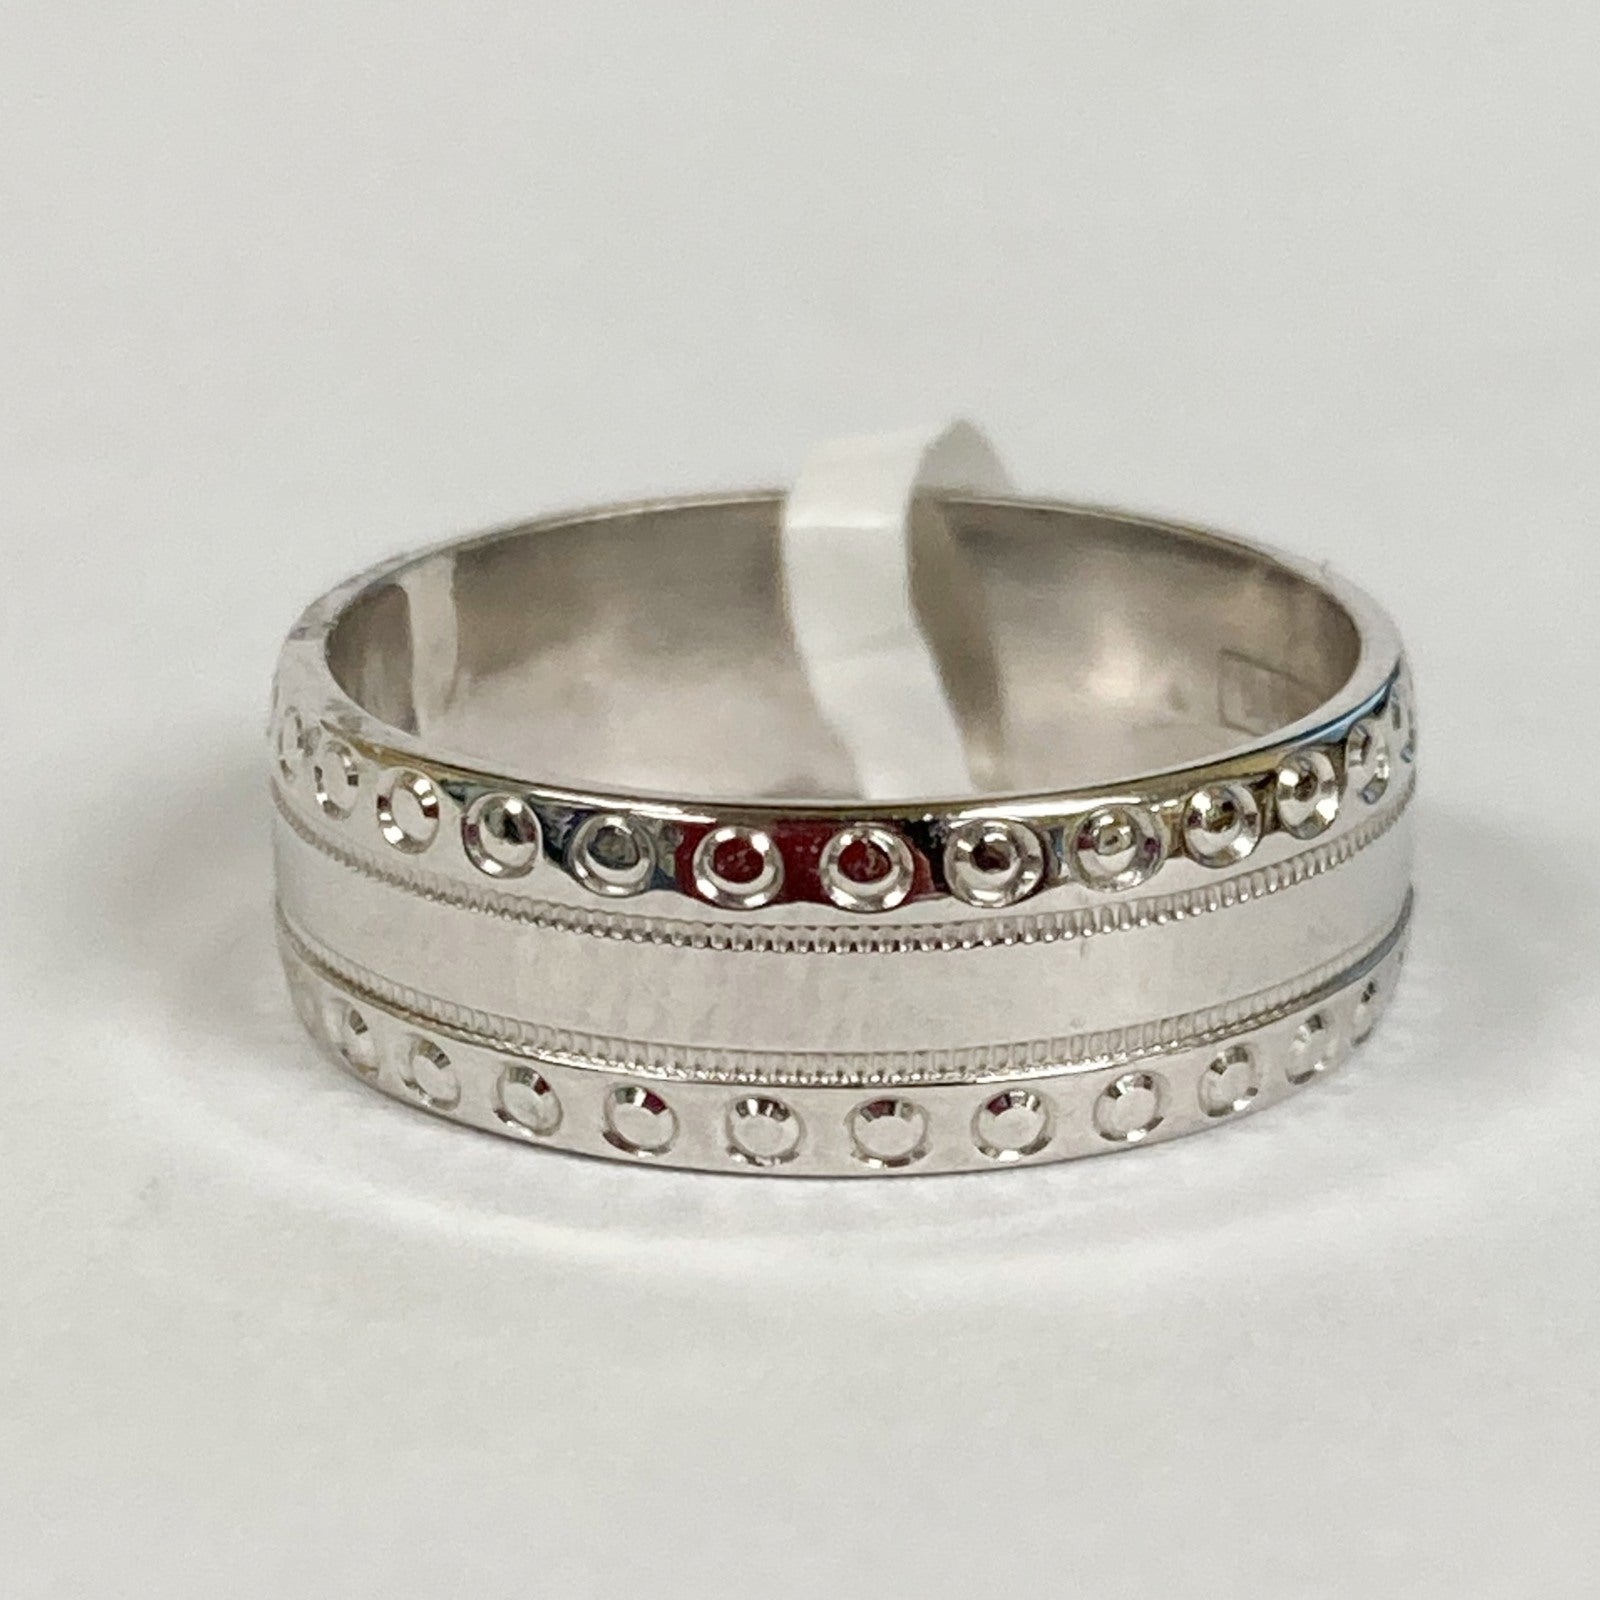 14k Pattern Wedding Band with Beaded Edges